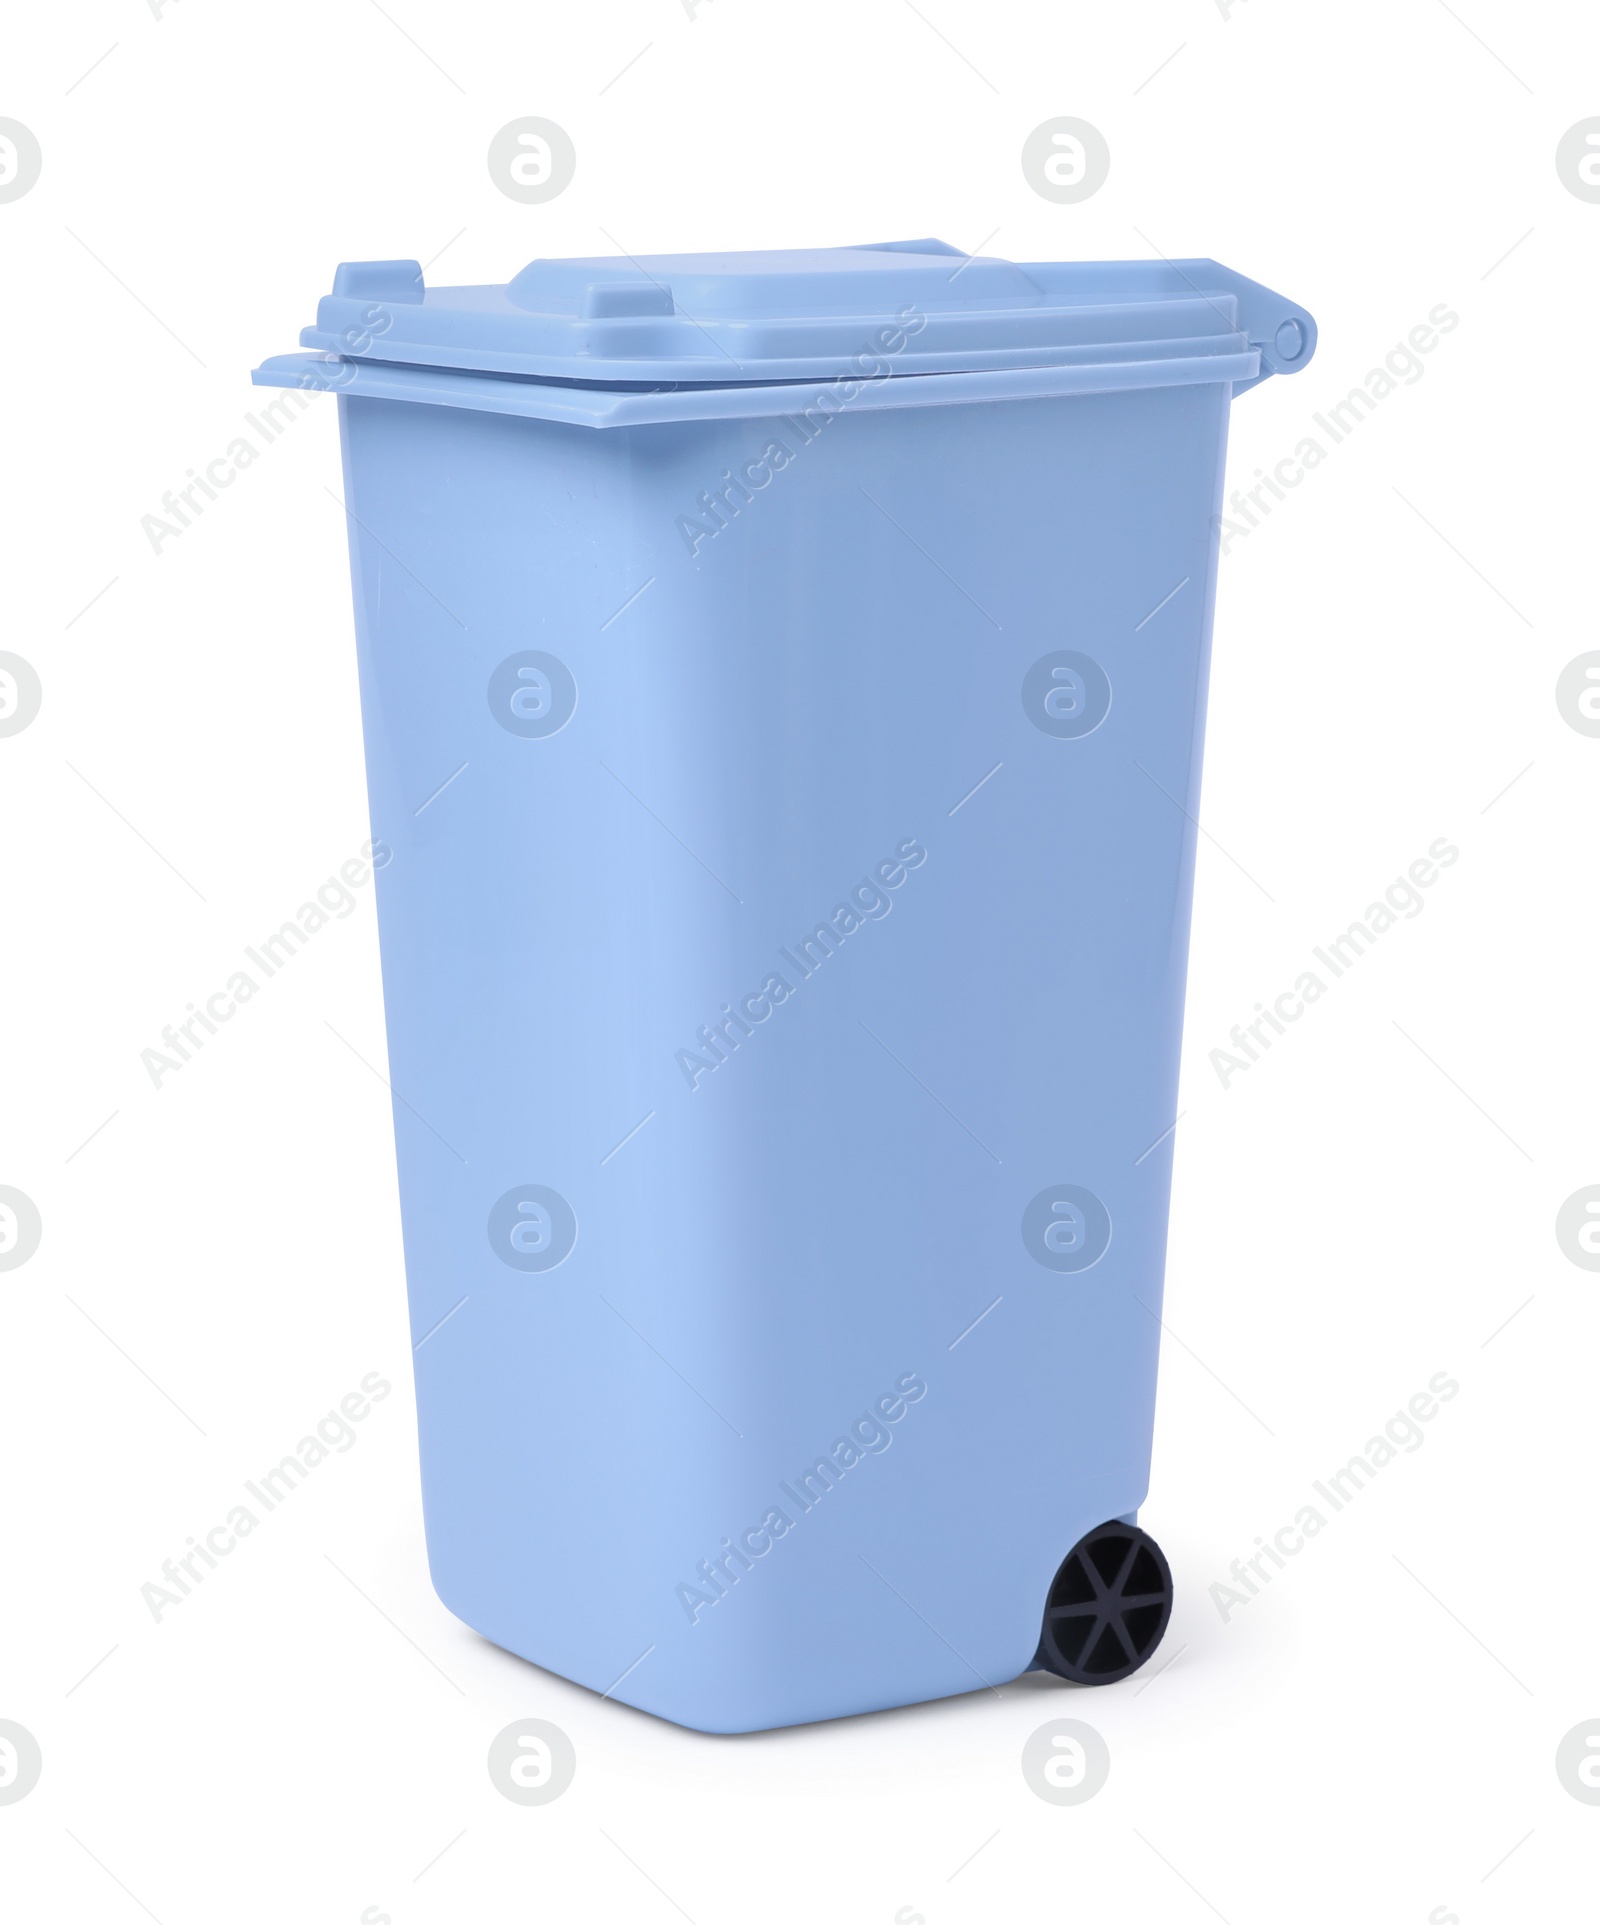 Photo of Recycling bin for batteries isolated on white